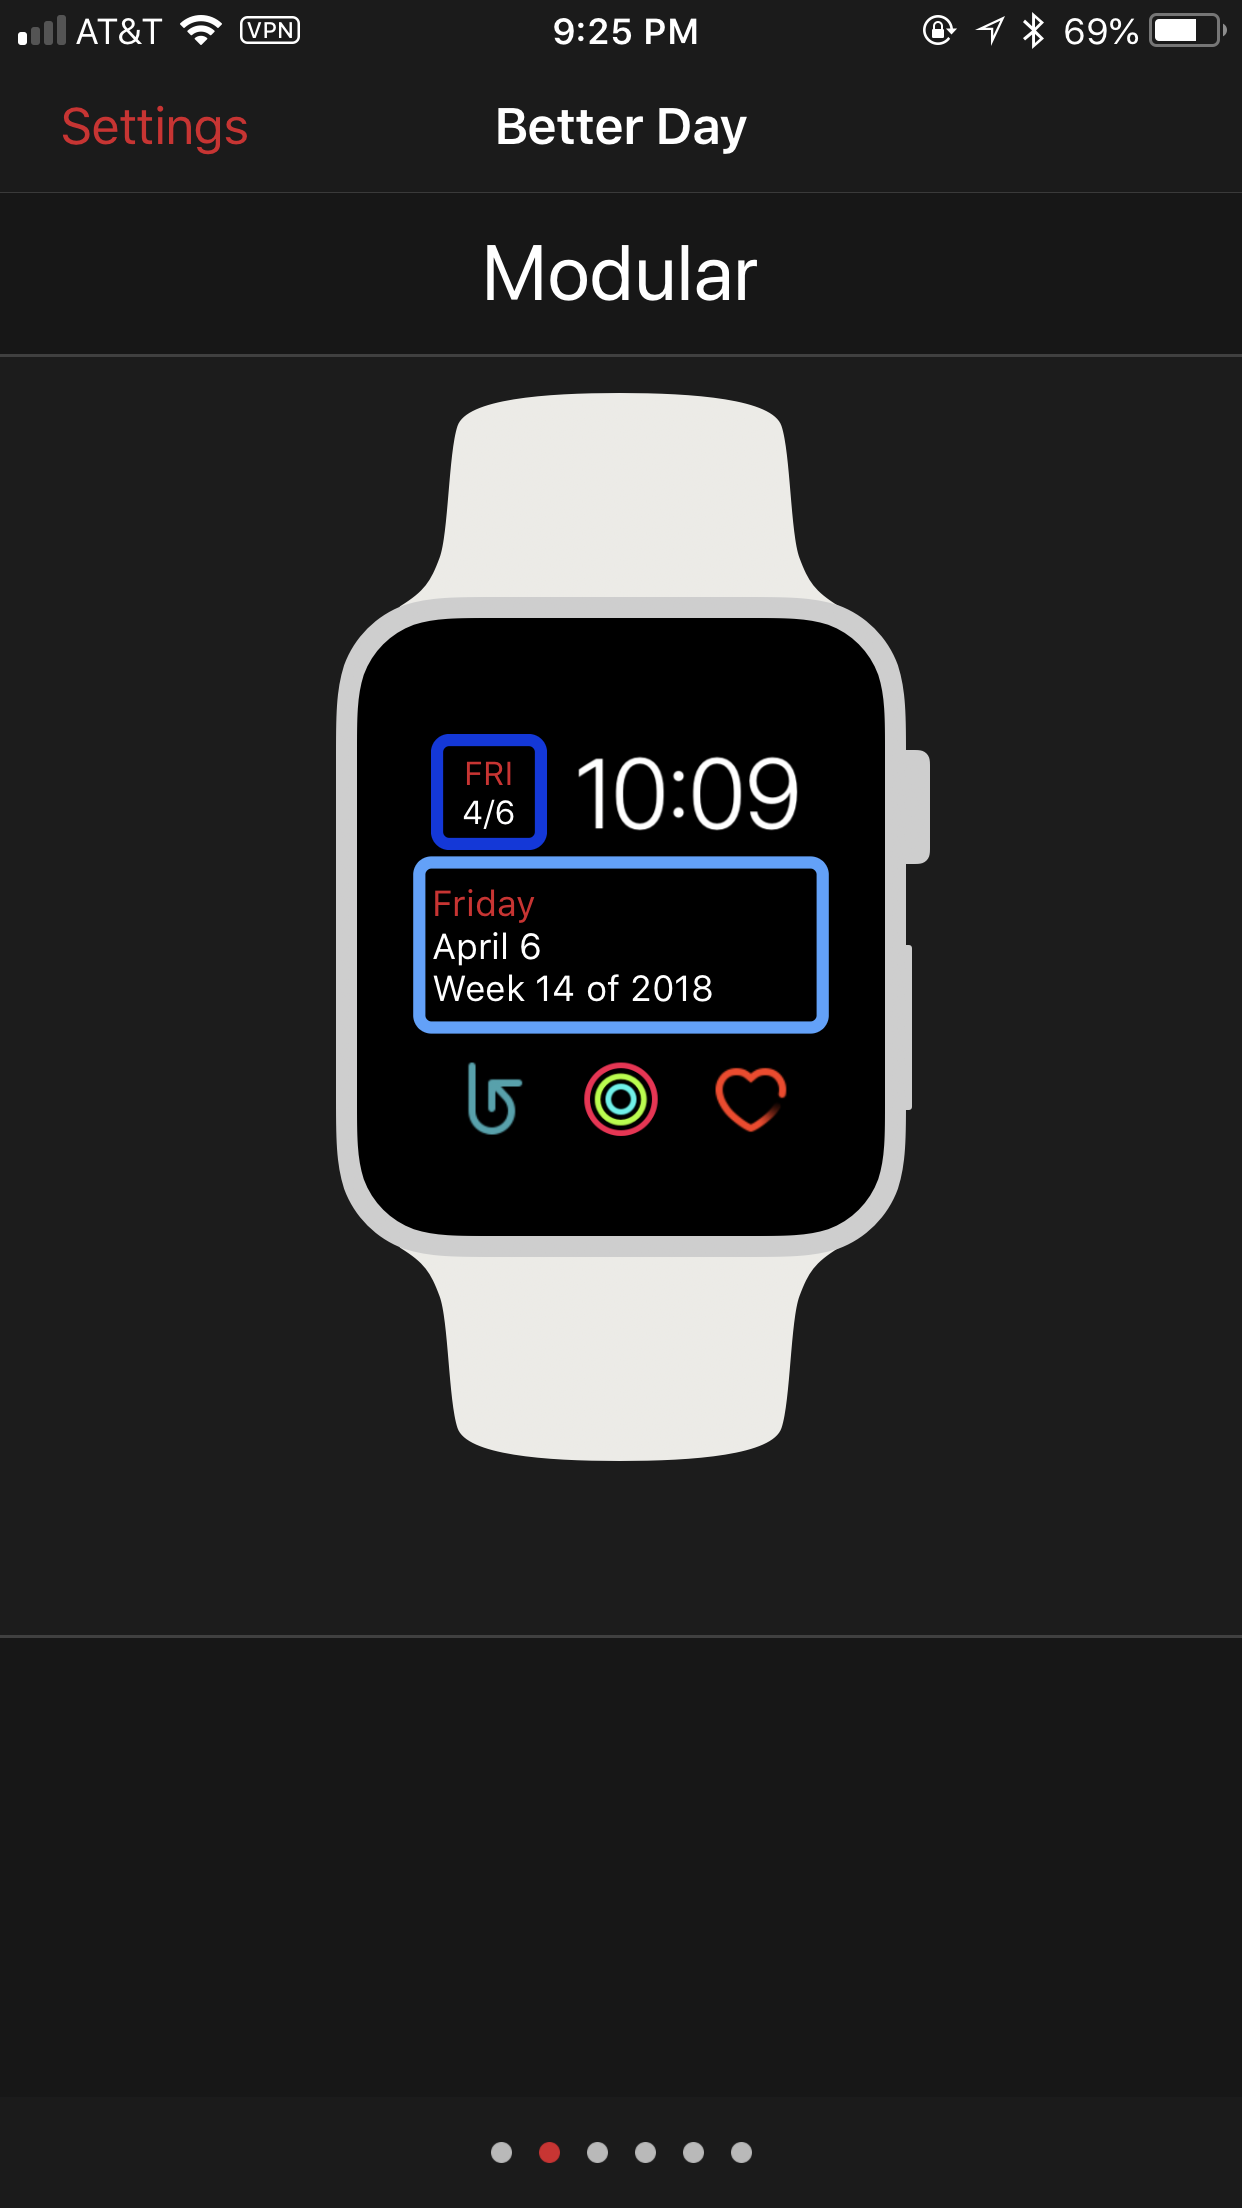 The configurator displaying the modular watch face with Better Day in the top left and centerpiece slots